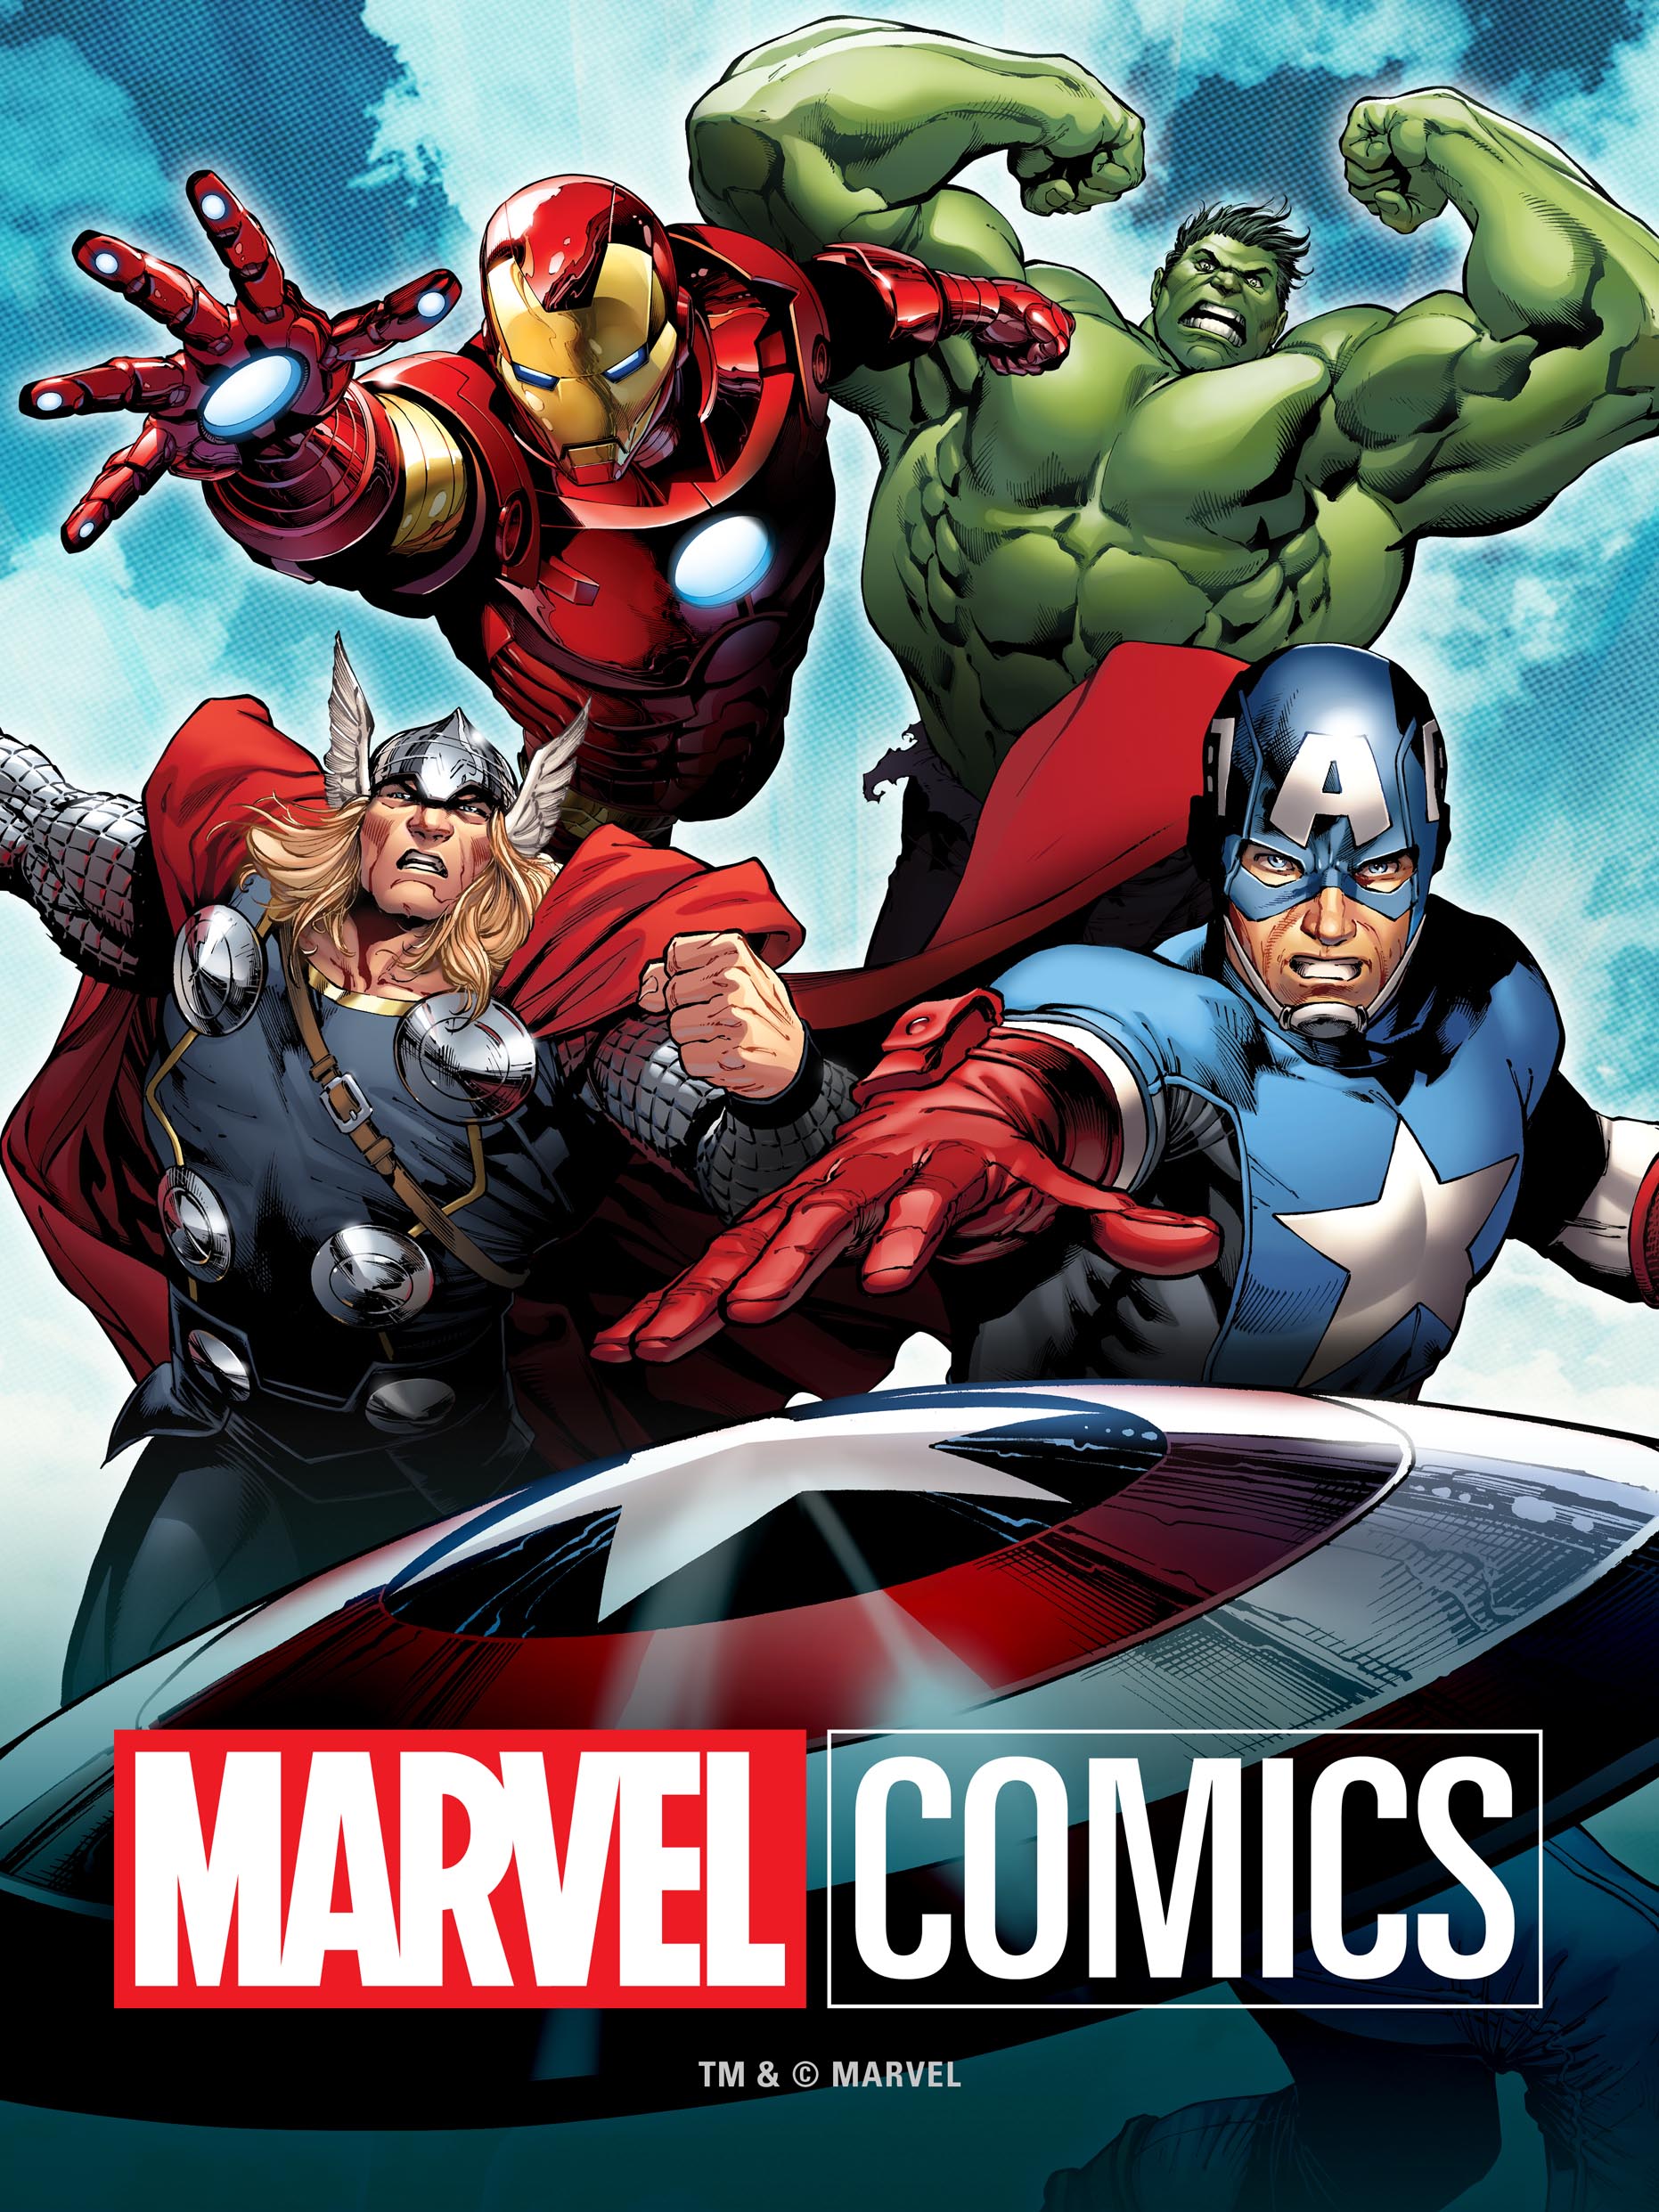 DIGITAL COMICS Marvel goes exclusive with ComiXology for